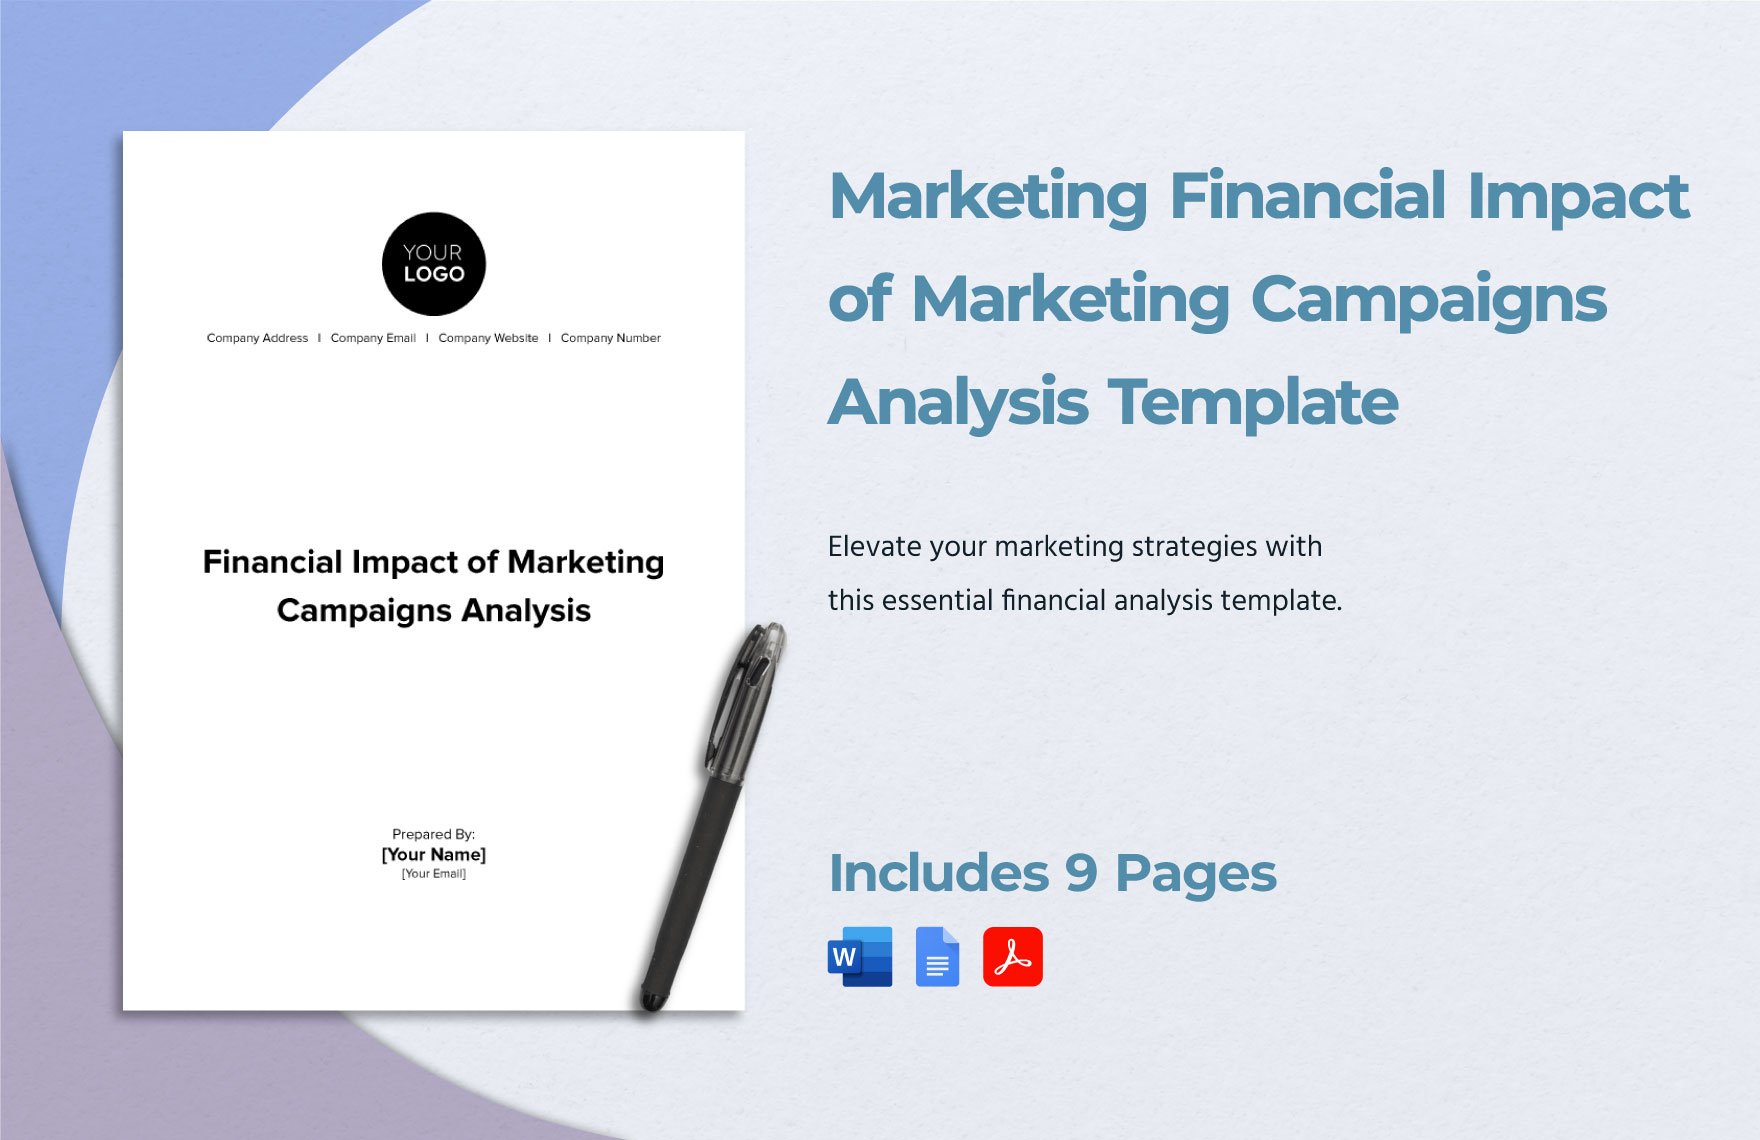 Marketing Financial Impact of Marketing Campaigns Analysis Template